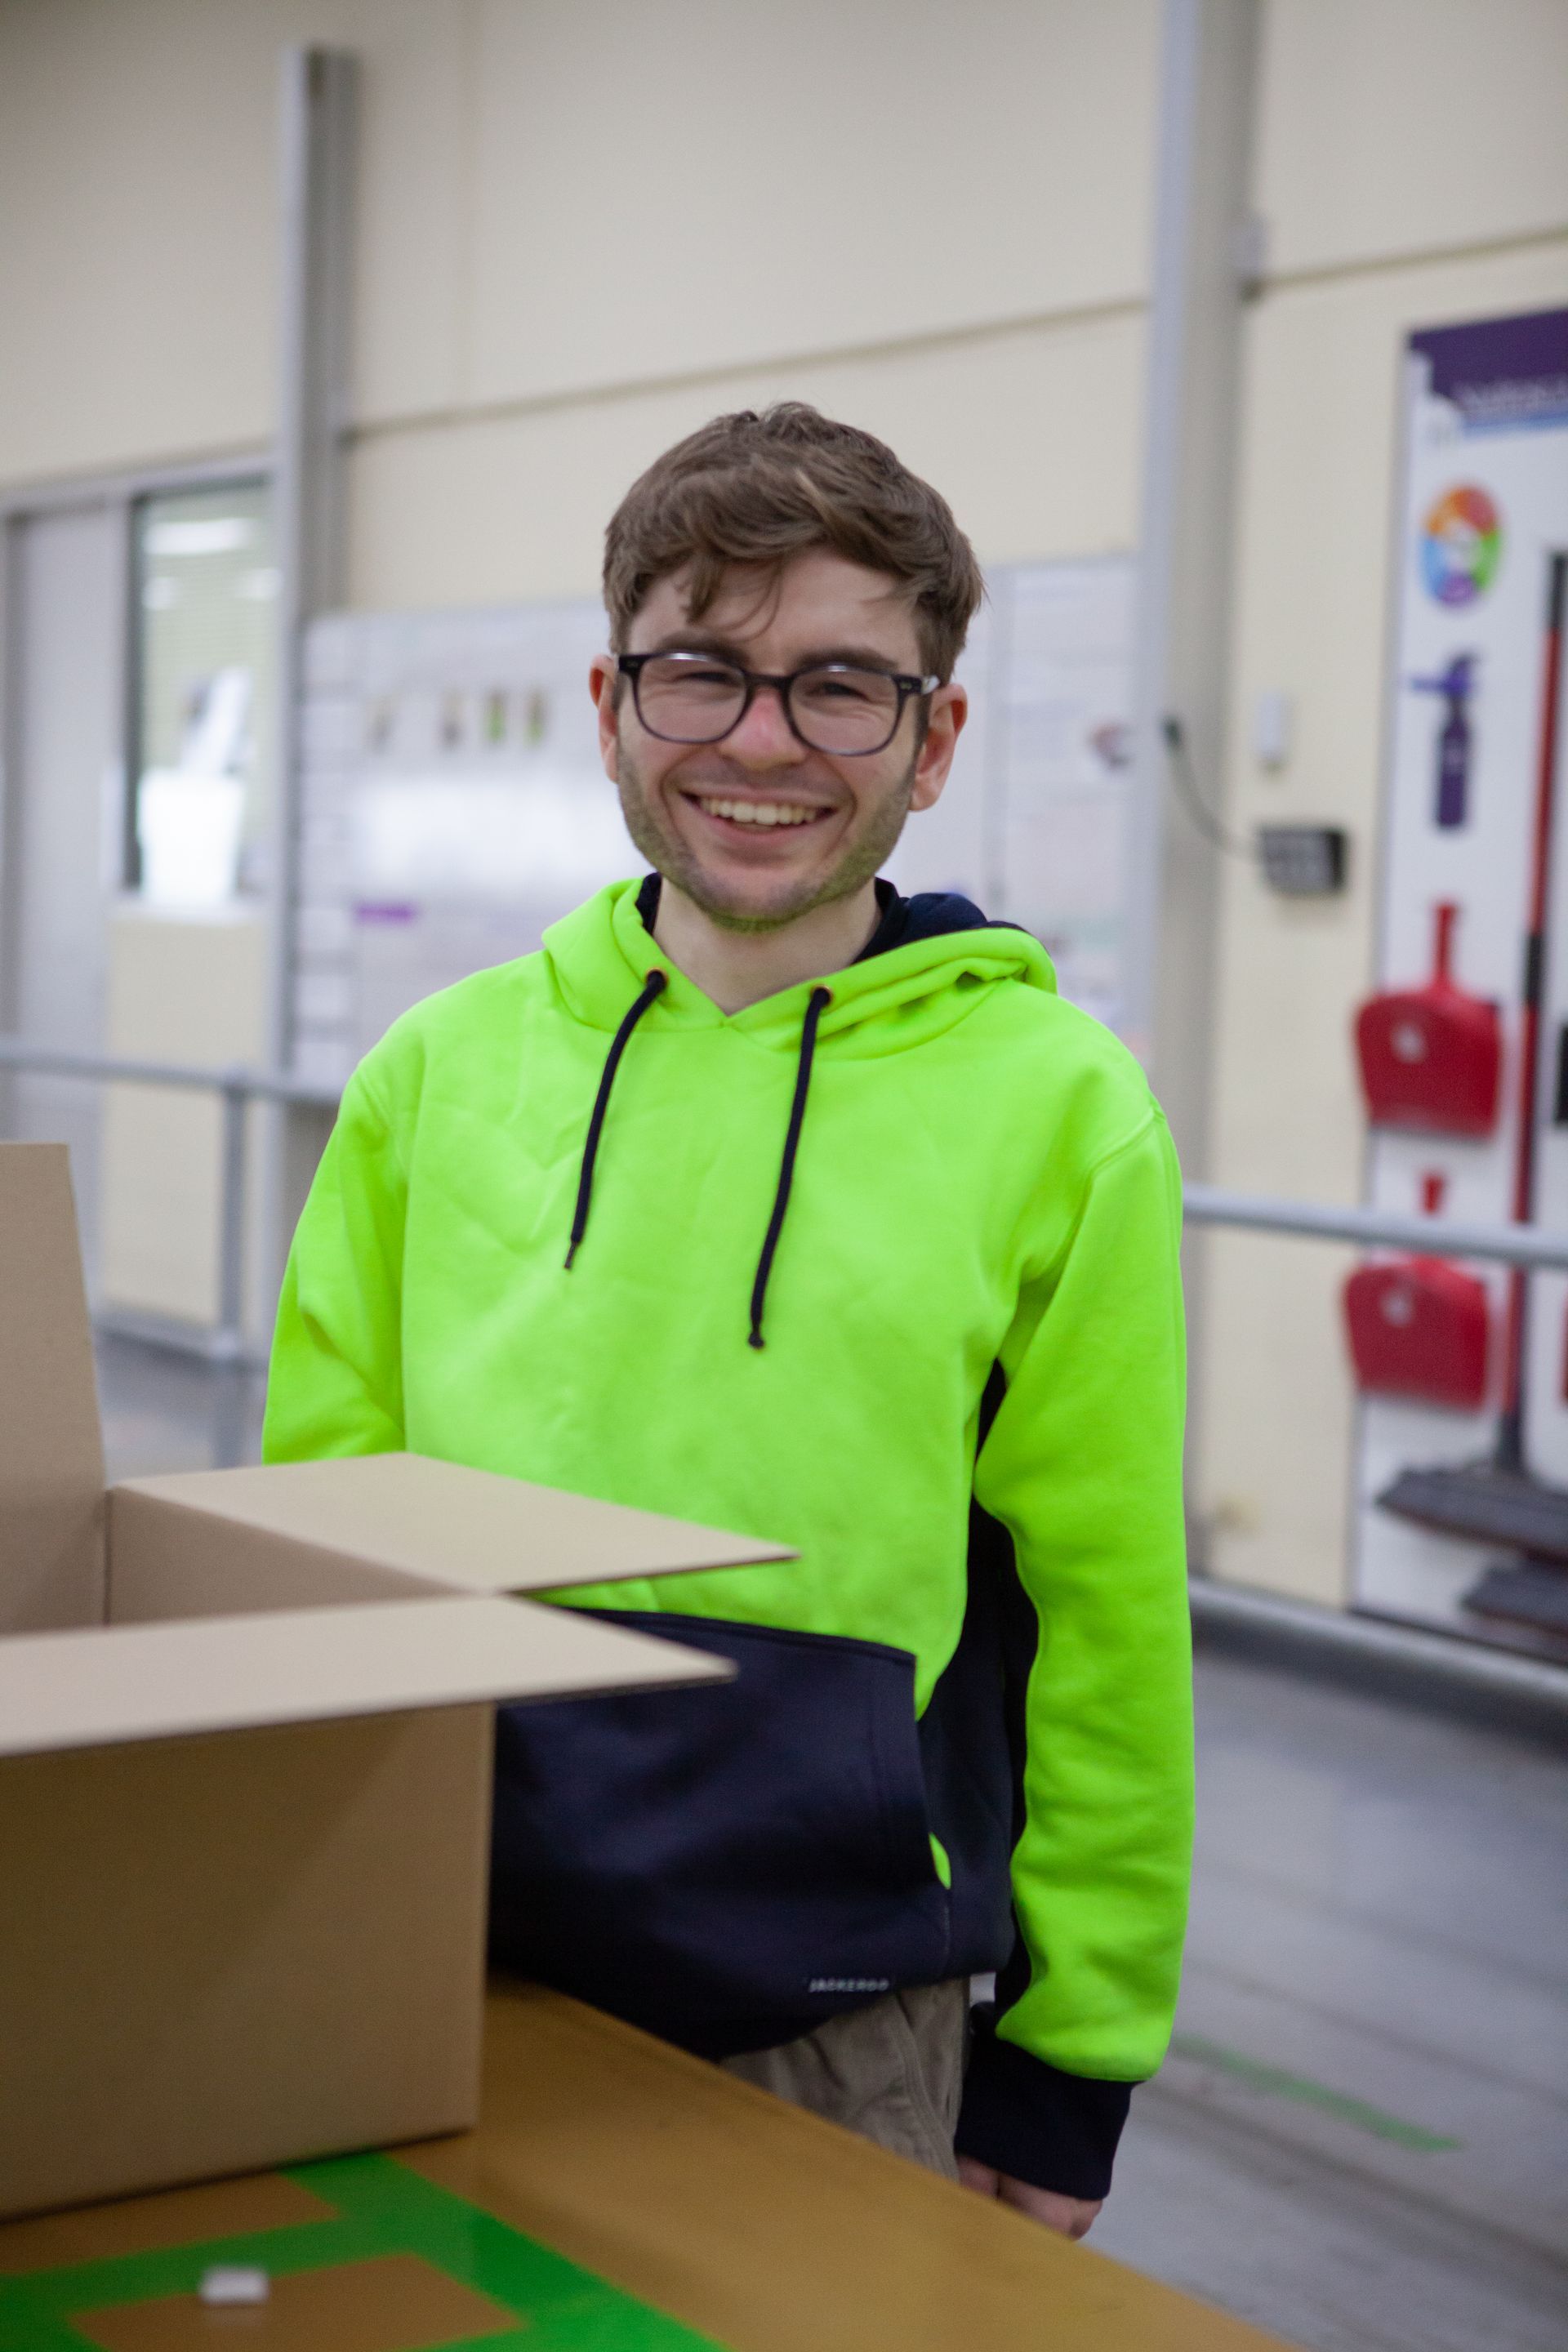 Young man standing and smiling as he packs boxes